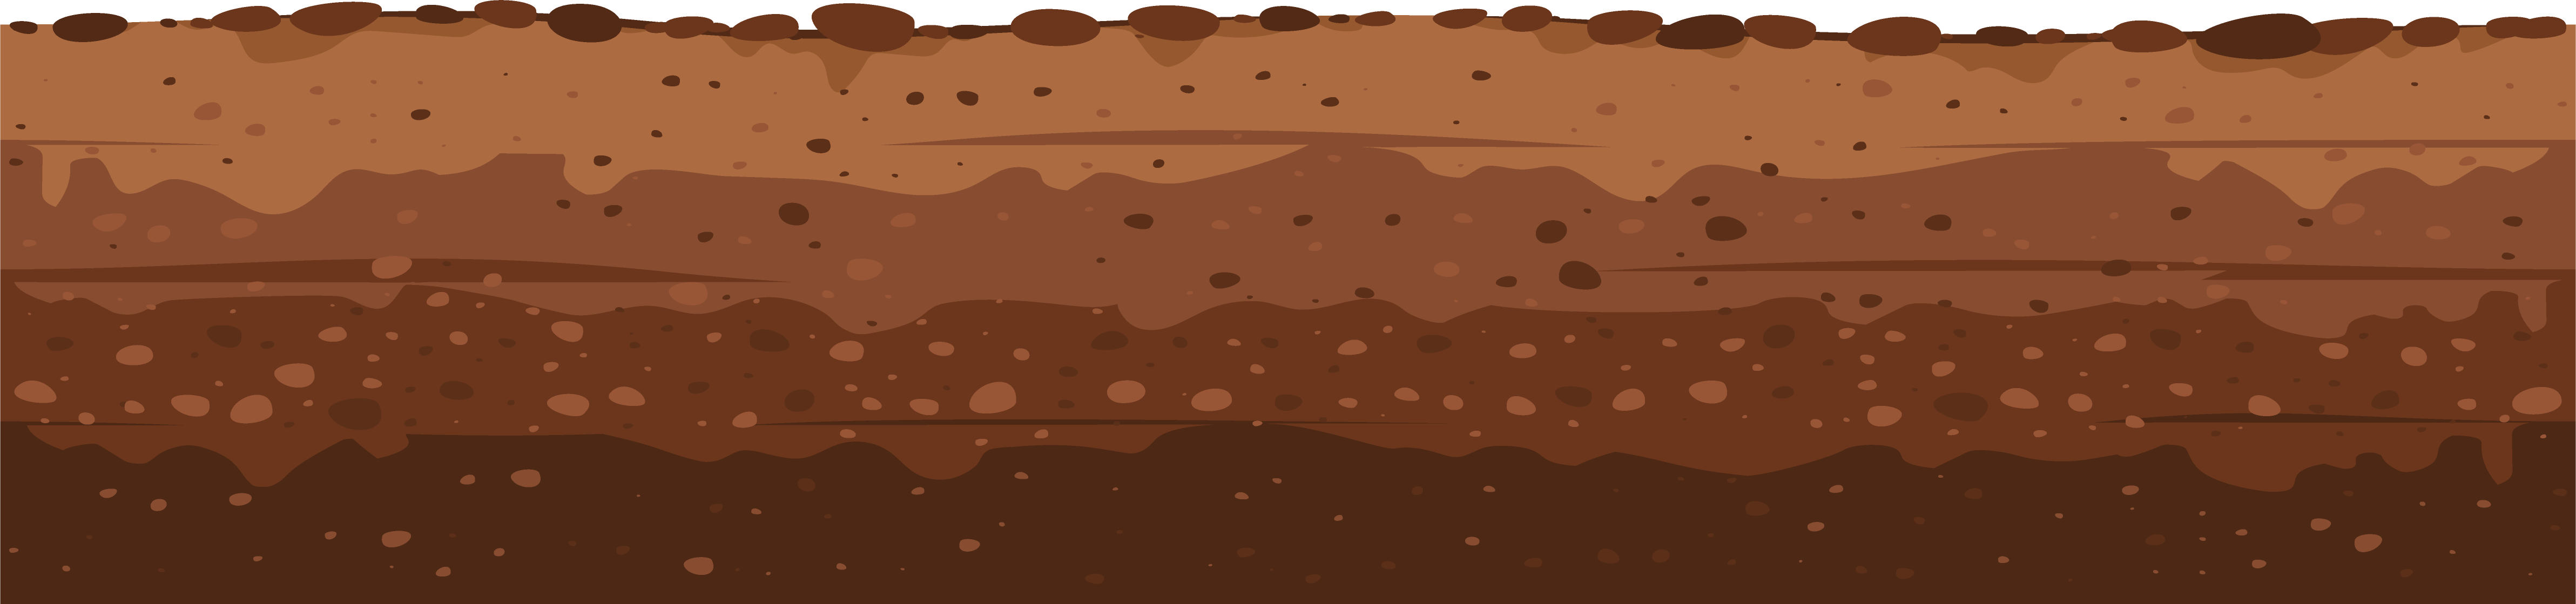 Soil ground and underground layers, earth texture